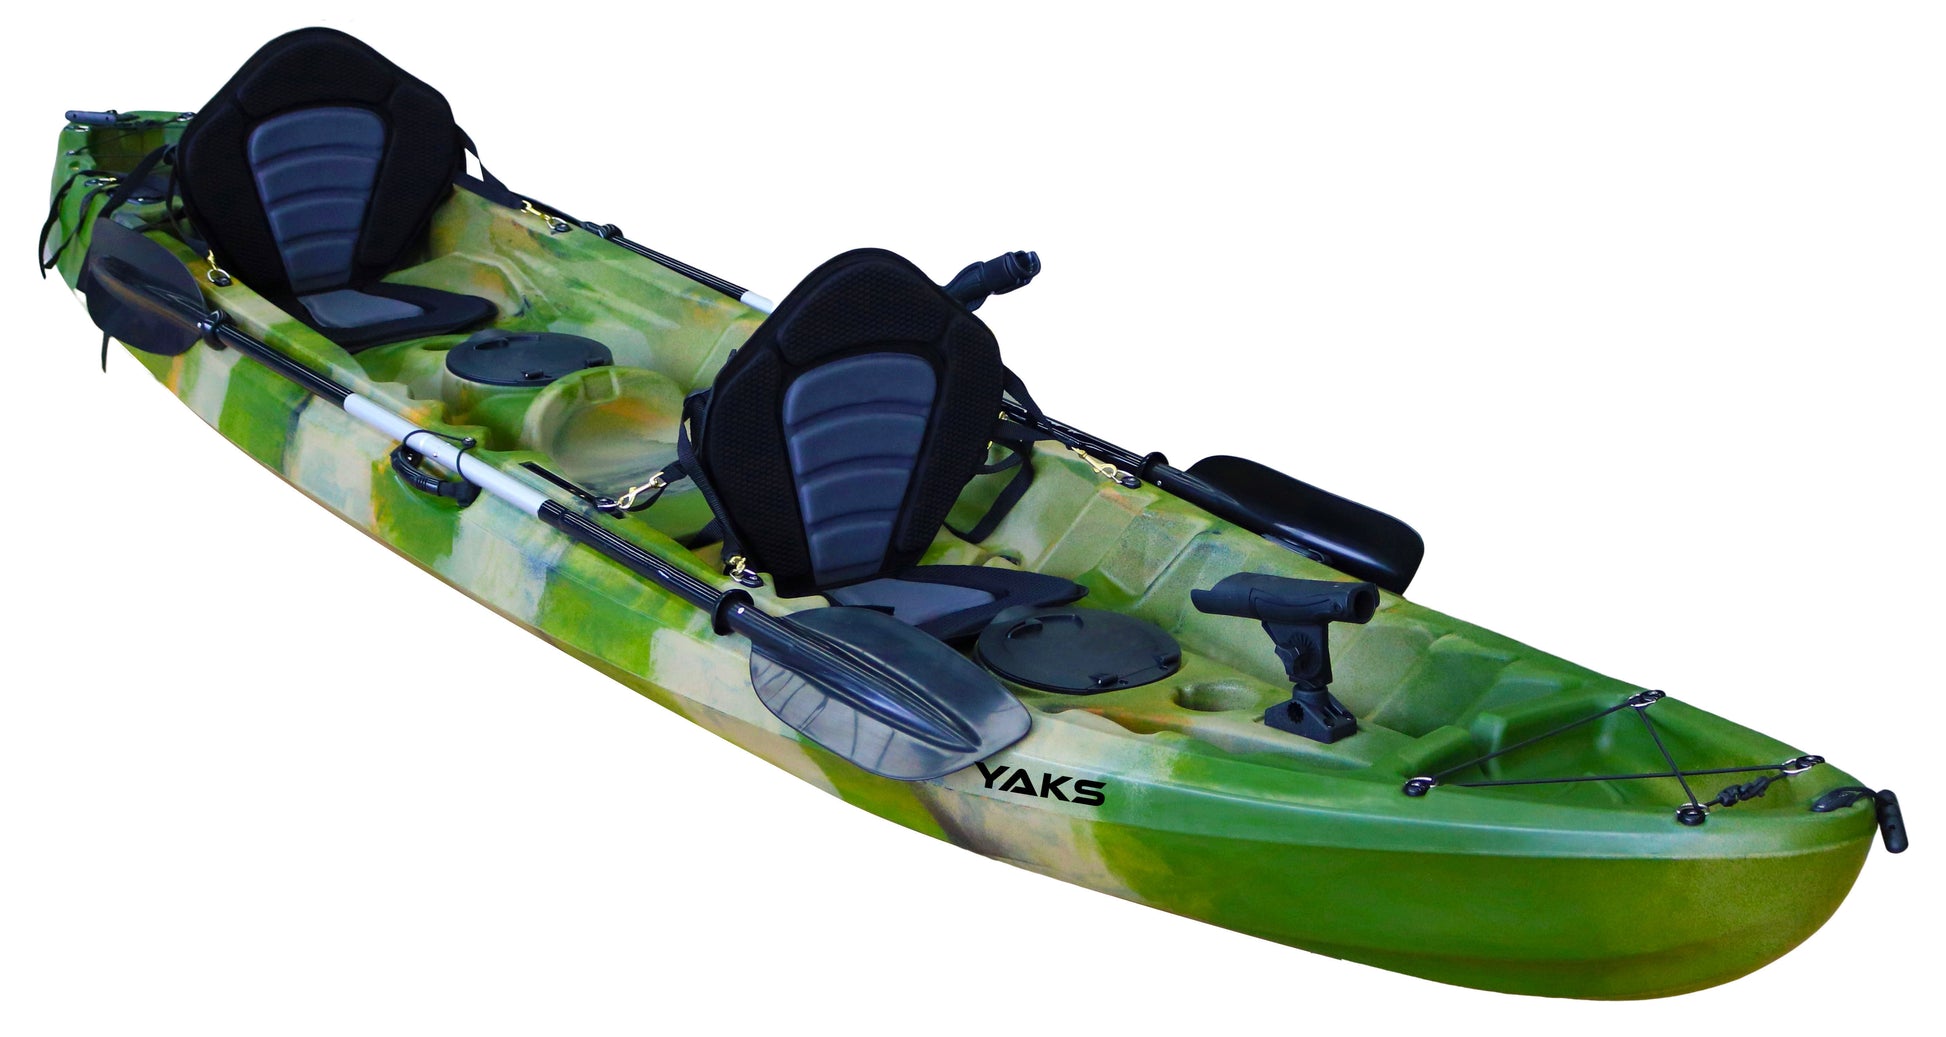 Tandem Fishing Angler Kayak | 2 or 3 Person | 12.5’ Sit On Top | 550lbs Capacity w/Kayak Trolley| Ocean Lakes Rivers | adult Youths Kids Family 